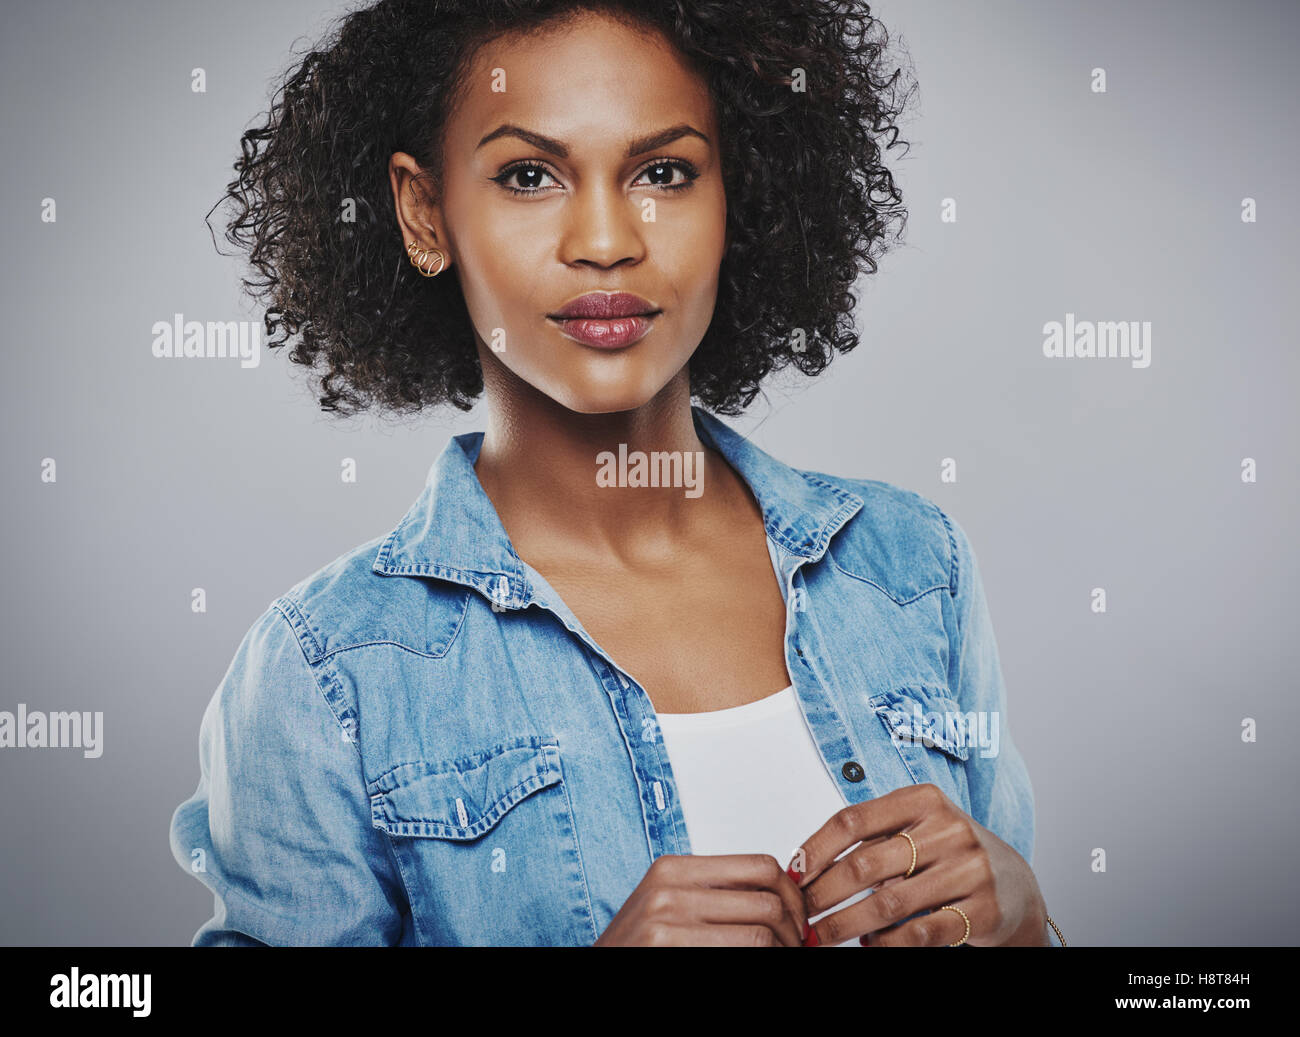 Serene woman with blue jean shirt and white top on gray background Stock Photo